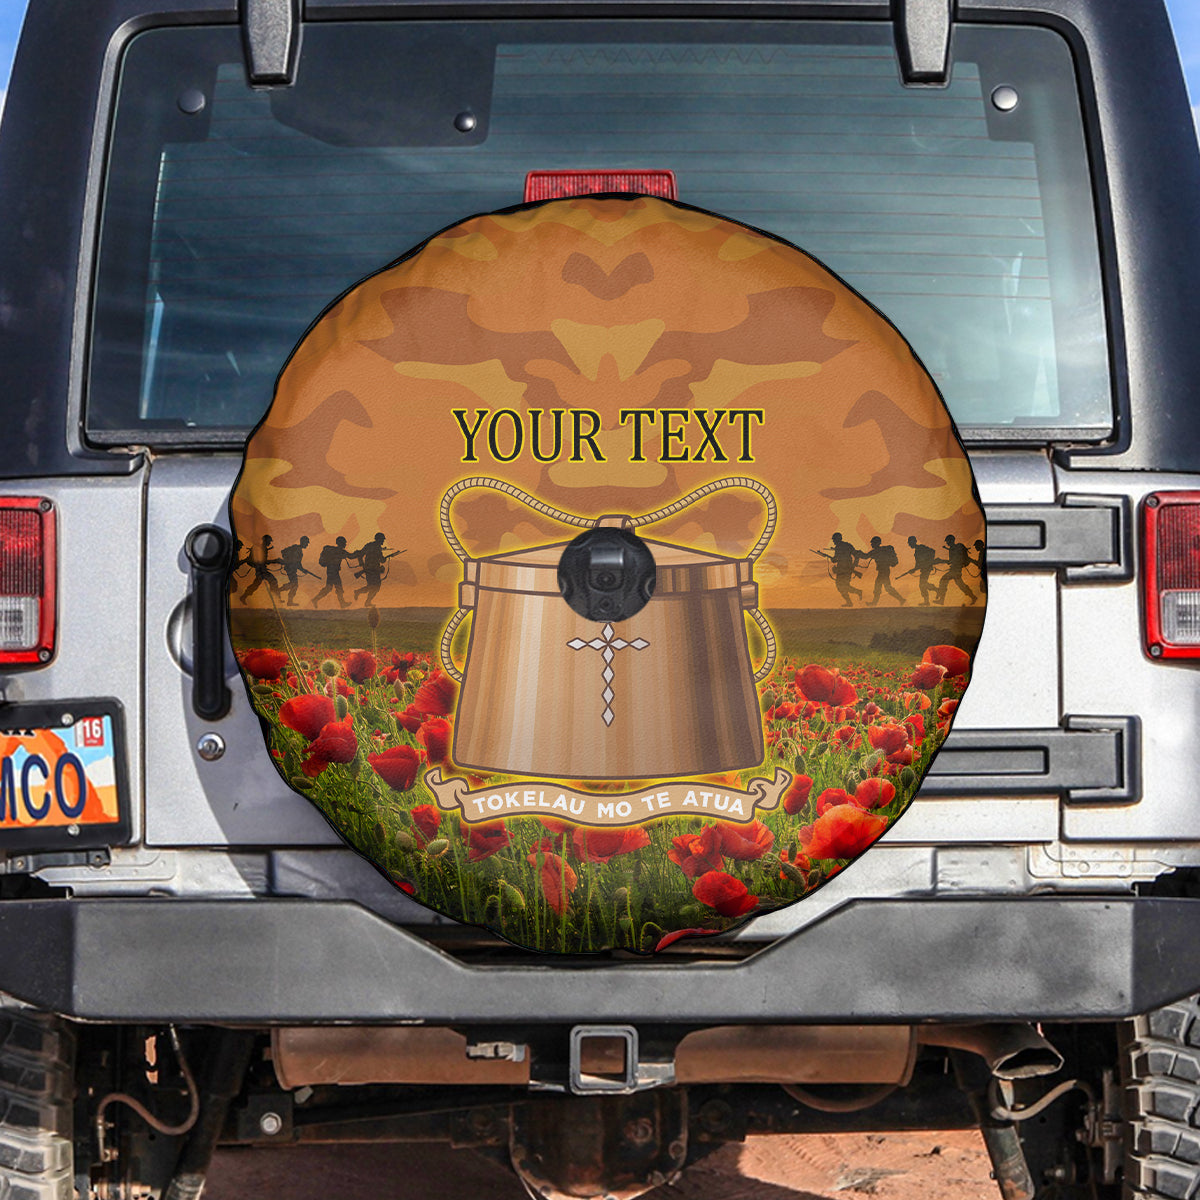 Tokelau ANZAC Day Personalised Spare Tire Cover with Poppy Field LT9 Art - Polynesian Pride